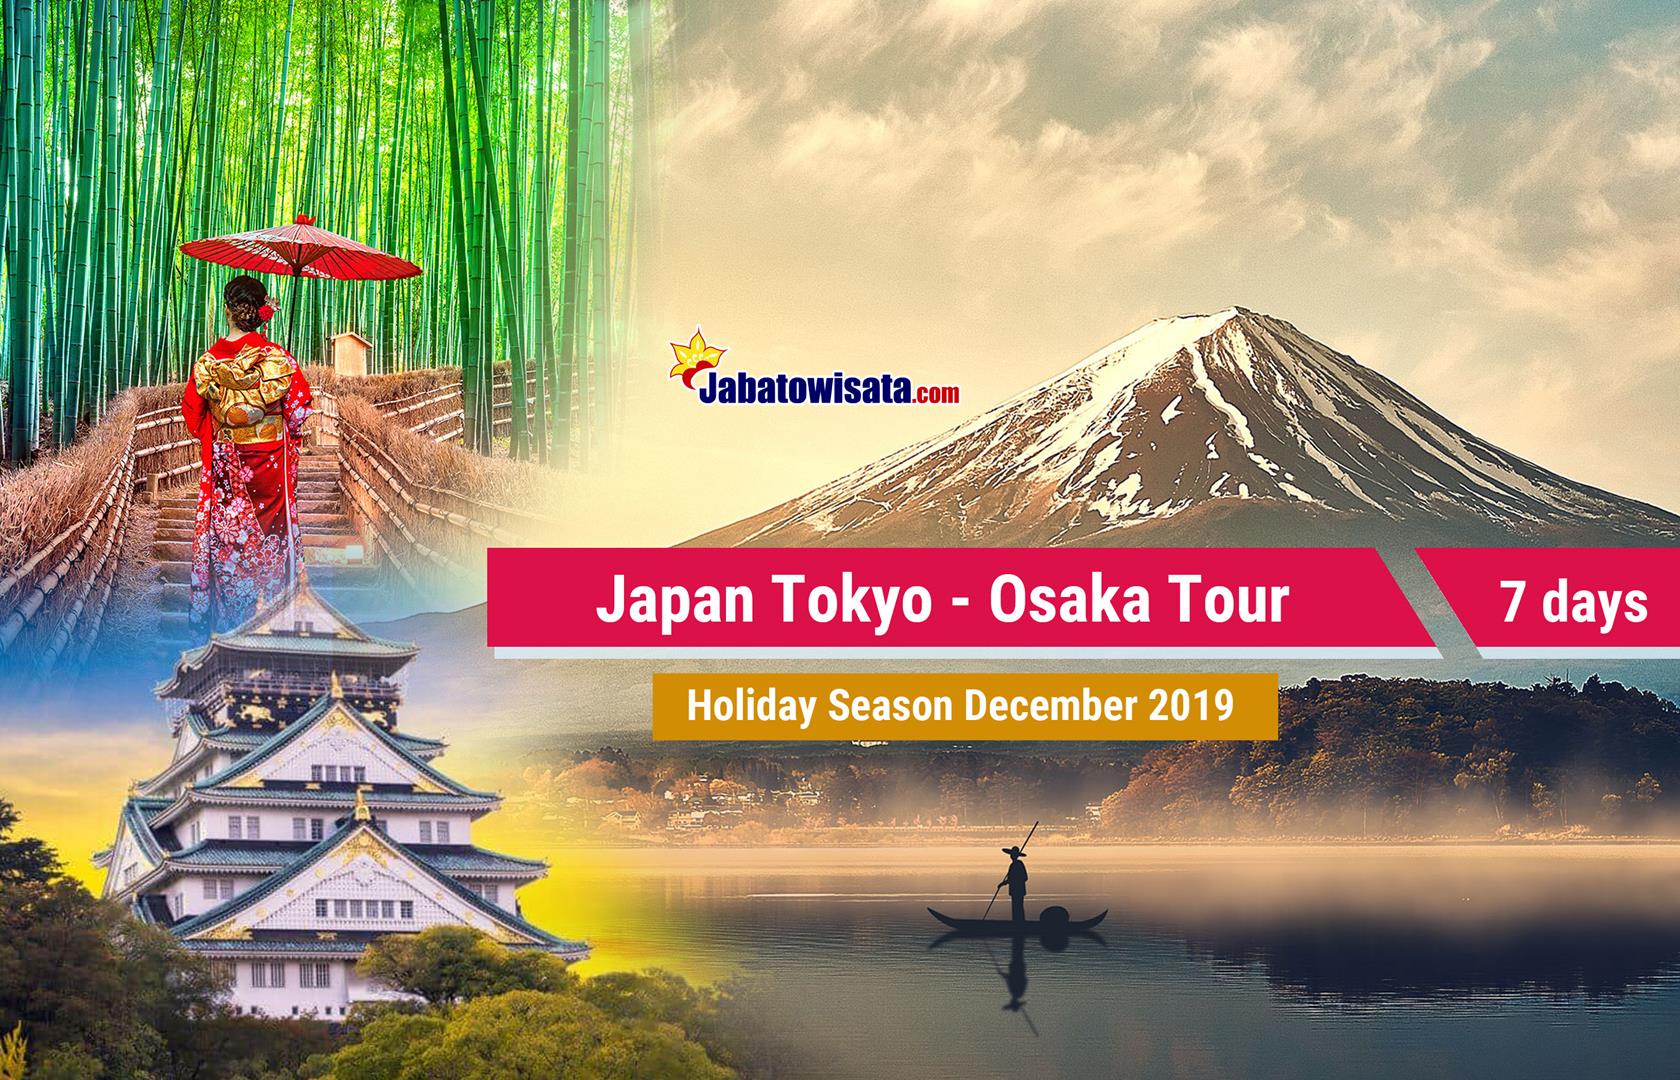 japan group tour packages